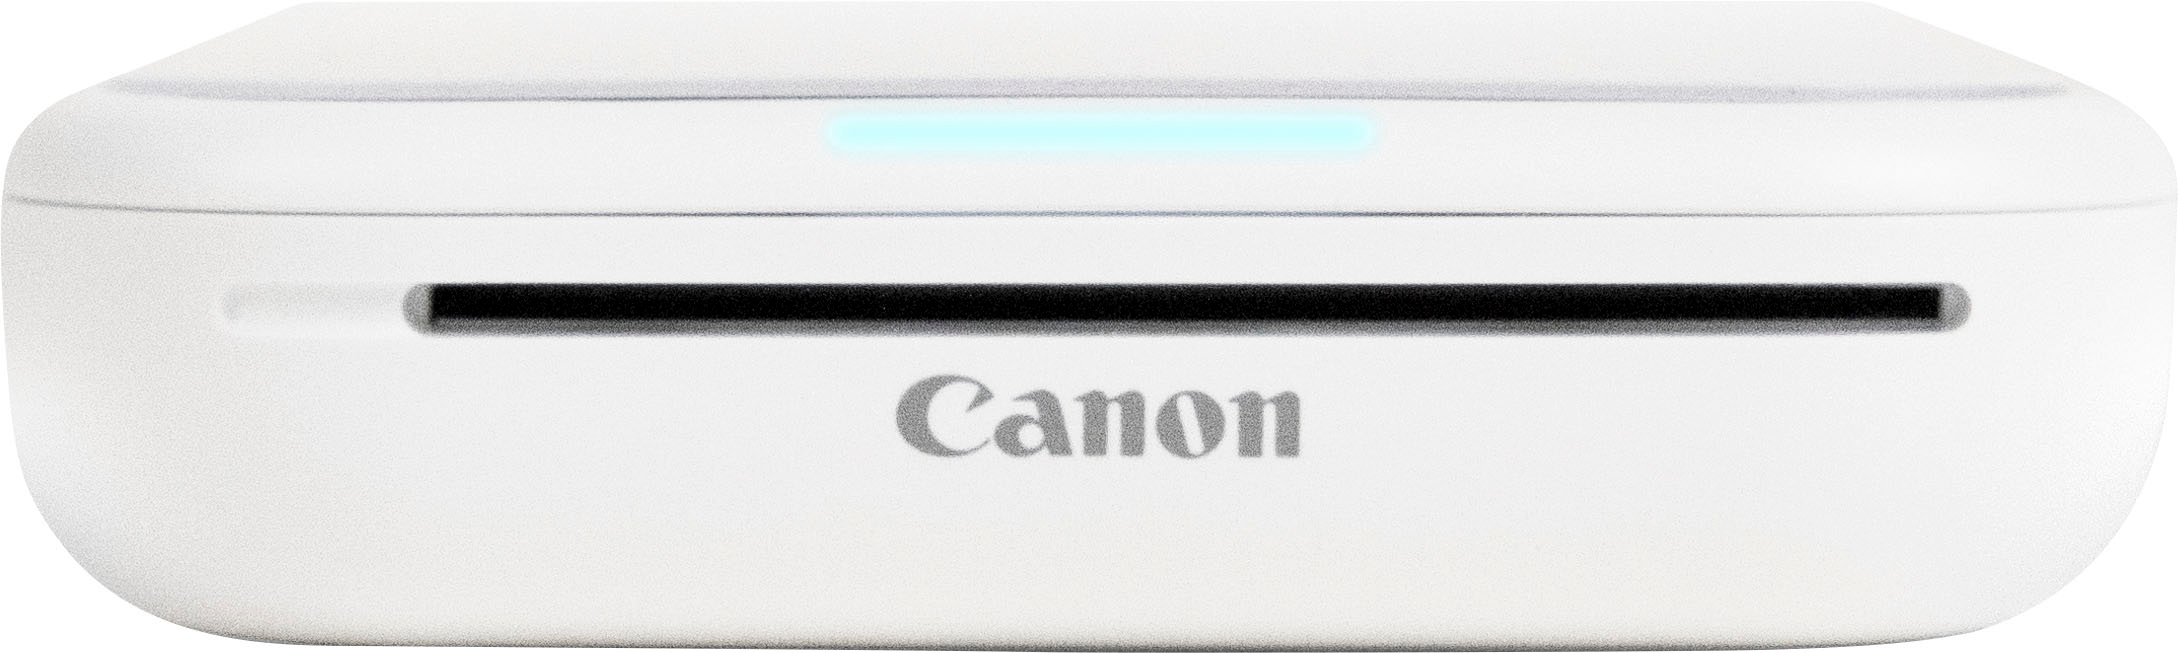 Questions and Answers: Canon IVY Mini Photo Printer Slate Gray 3204C003 -  Best Buy